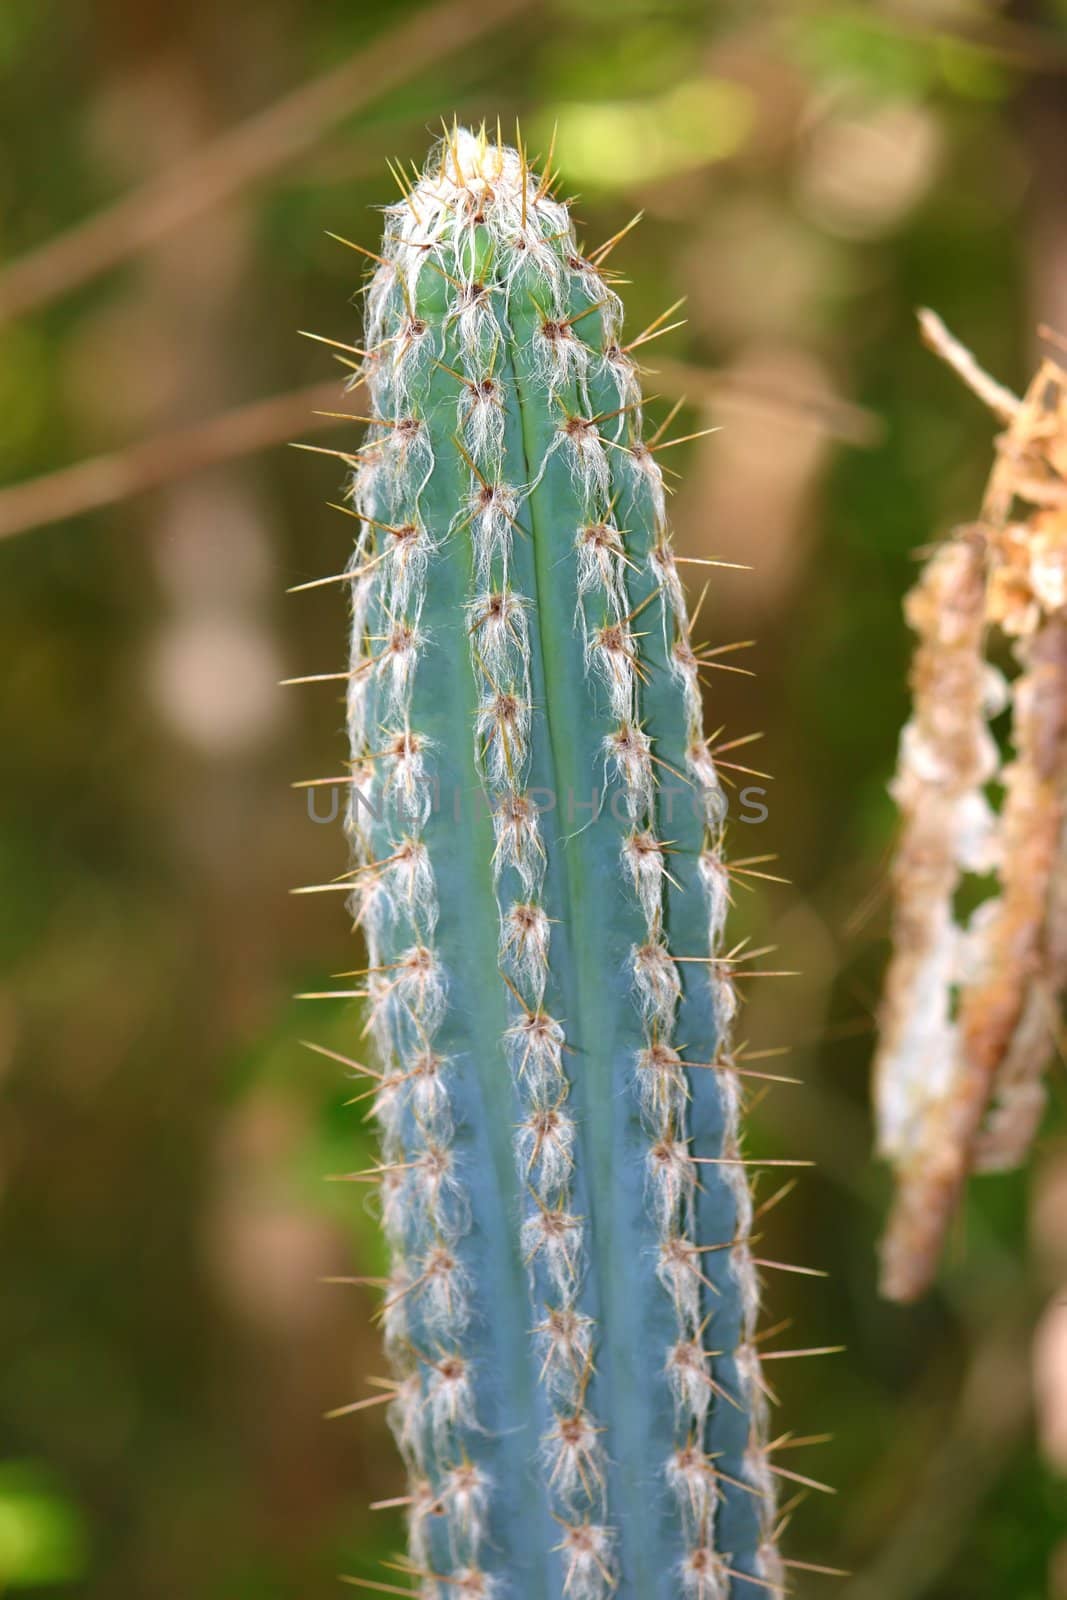 View of a cactus at the Guanica Dry Forest Reserve of Puerto Rico.